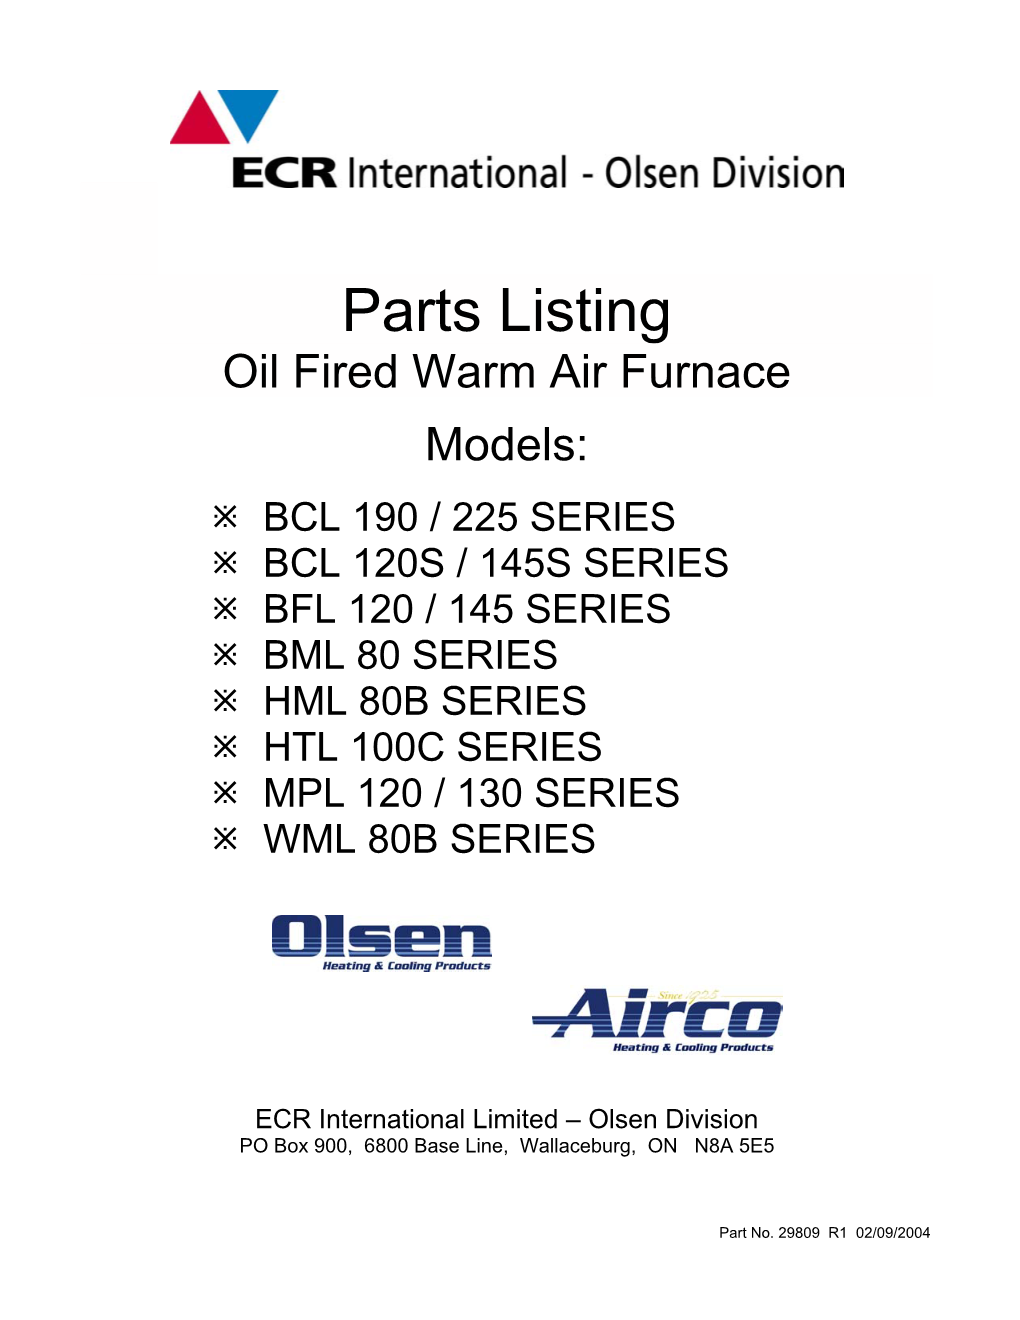 Parts Listing Oil Fired Warm Air Furnace